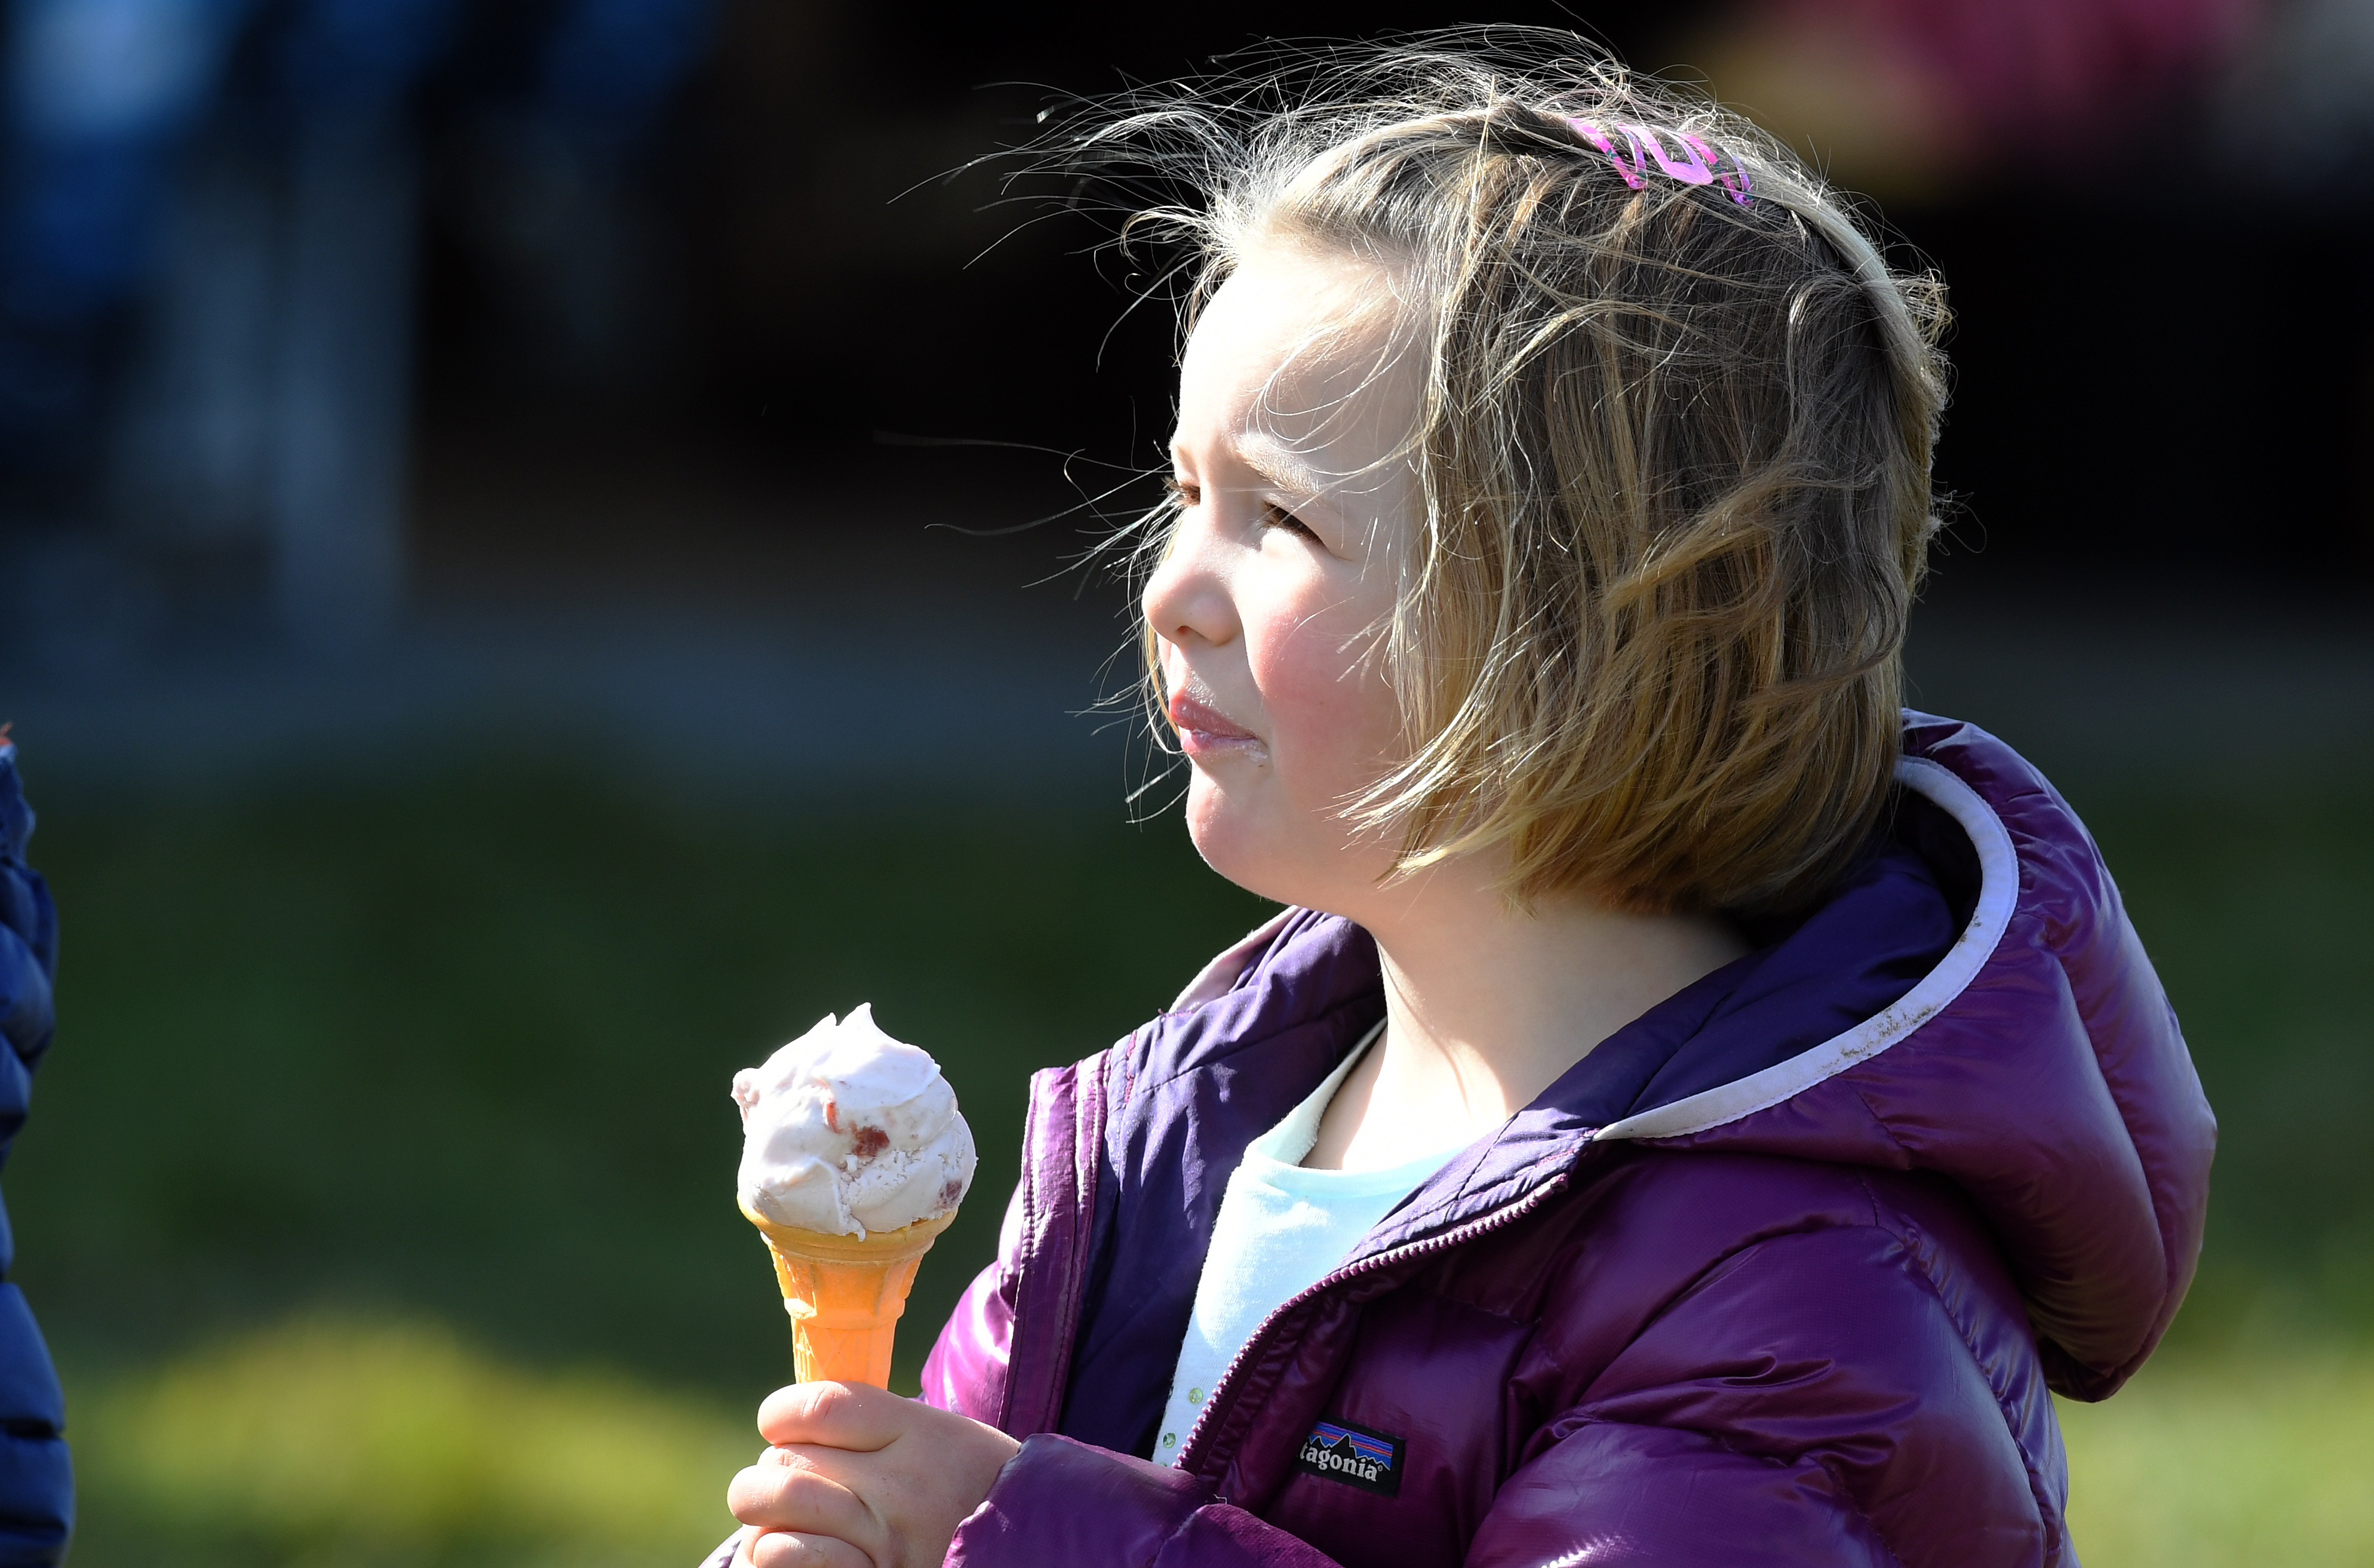 Mia Tindall enjoys an ice cream during the Gatcombe Horse Trials on March 25, 2018 in Stroud, England. (Anwar Hussein—WireImage)